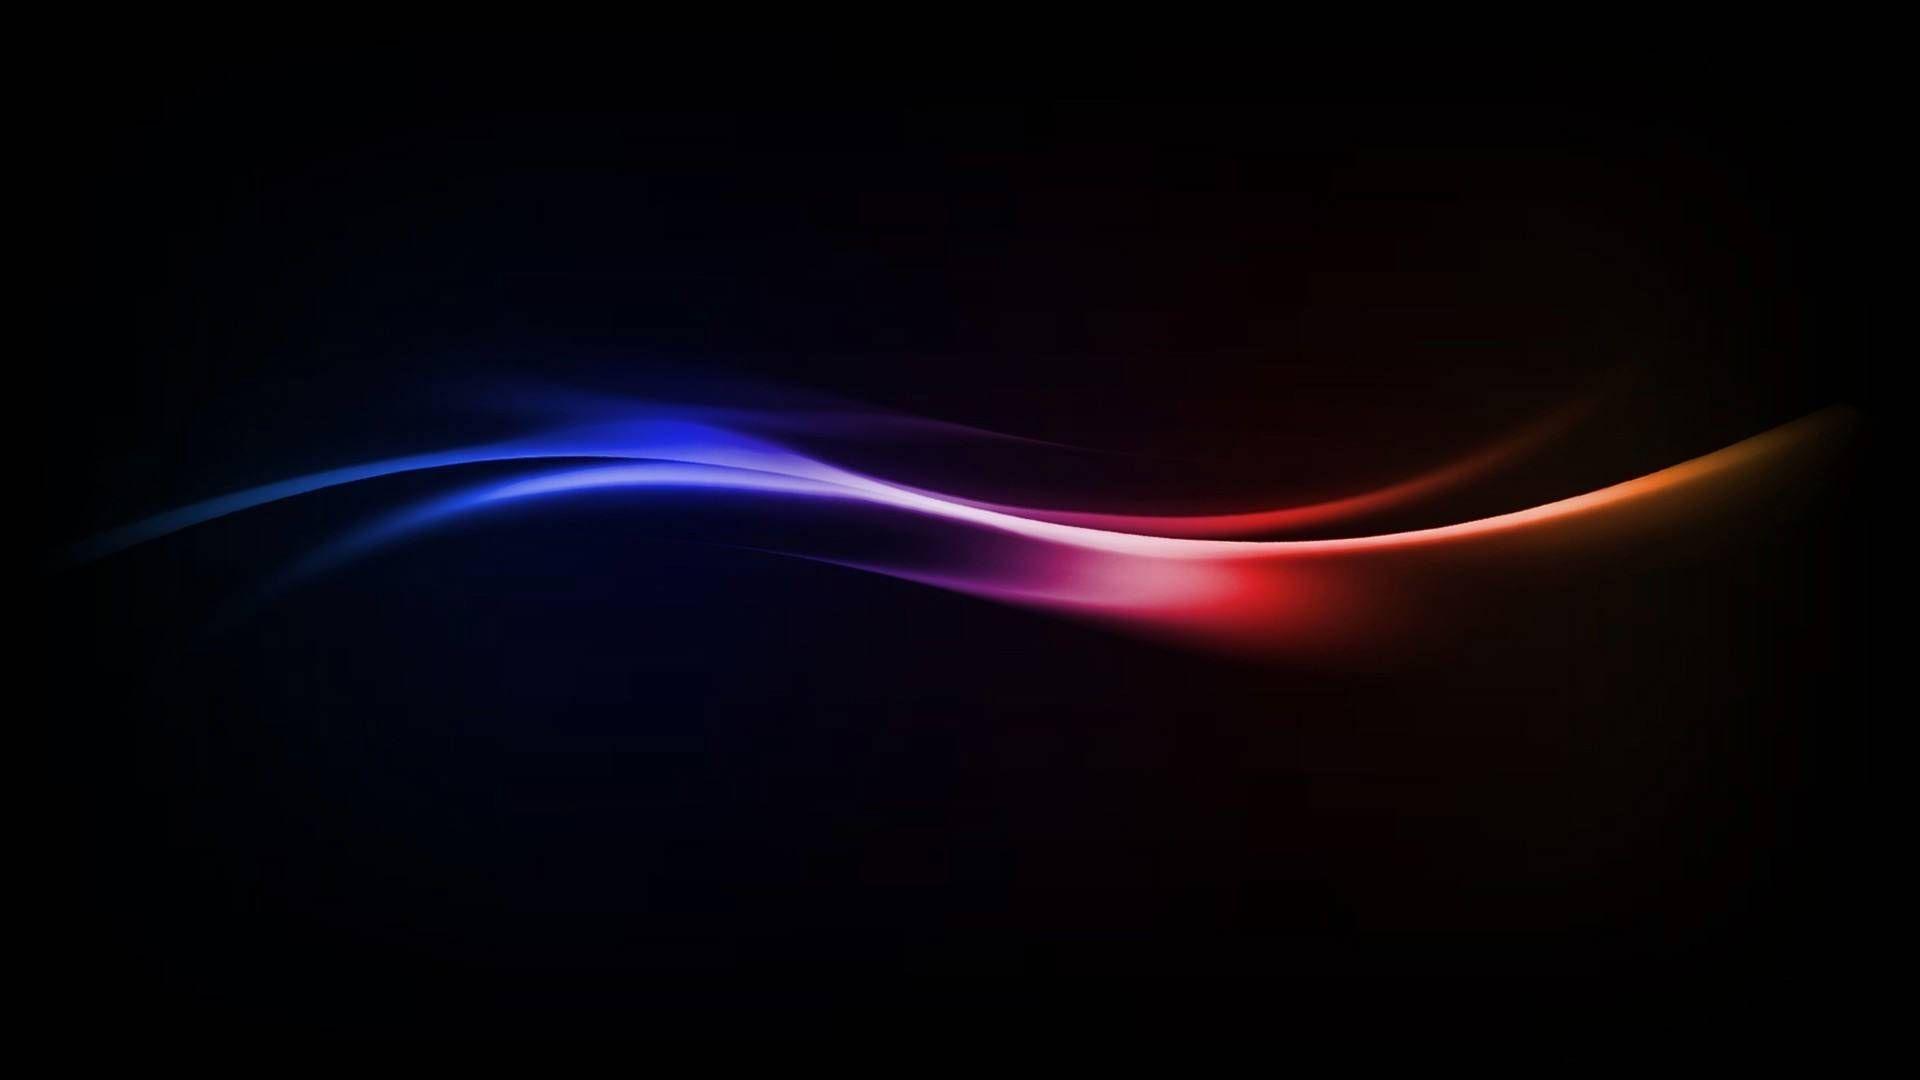 Dark Abstract Wallpapers - Top Free Dark Abstract Backgrounds ...